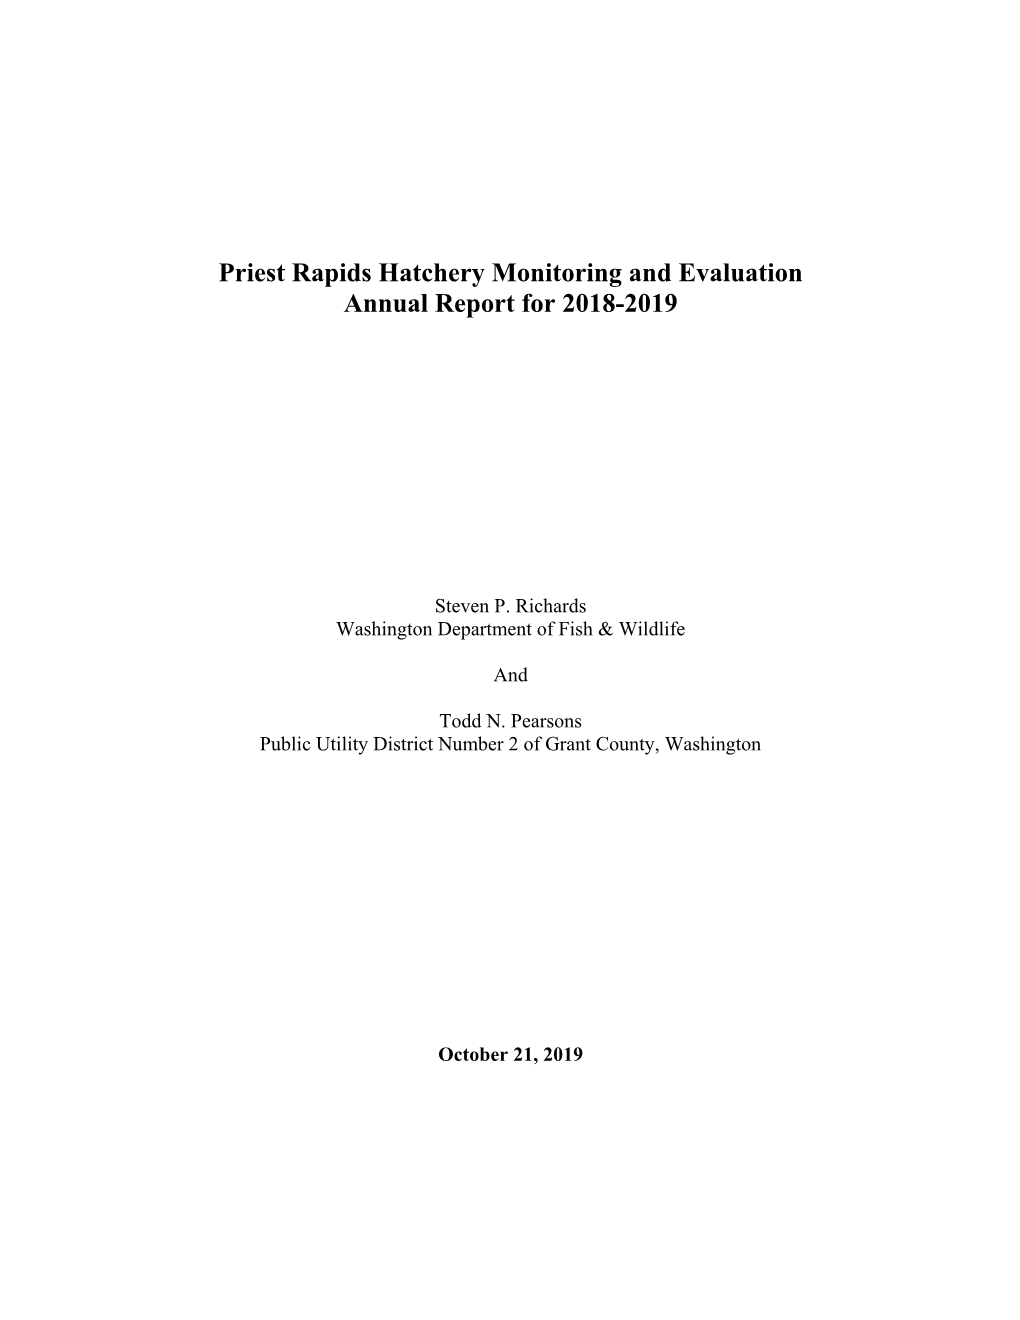 Priest Rapids Hatchery Monitoring and Evaluation Annual Report for 2018-2019